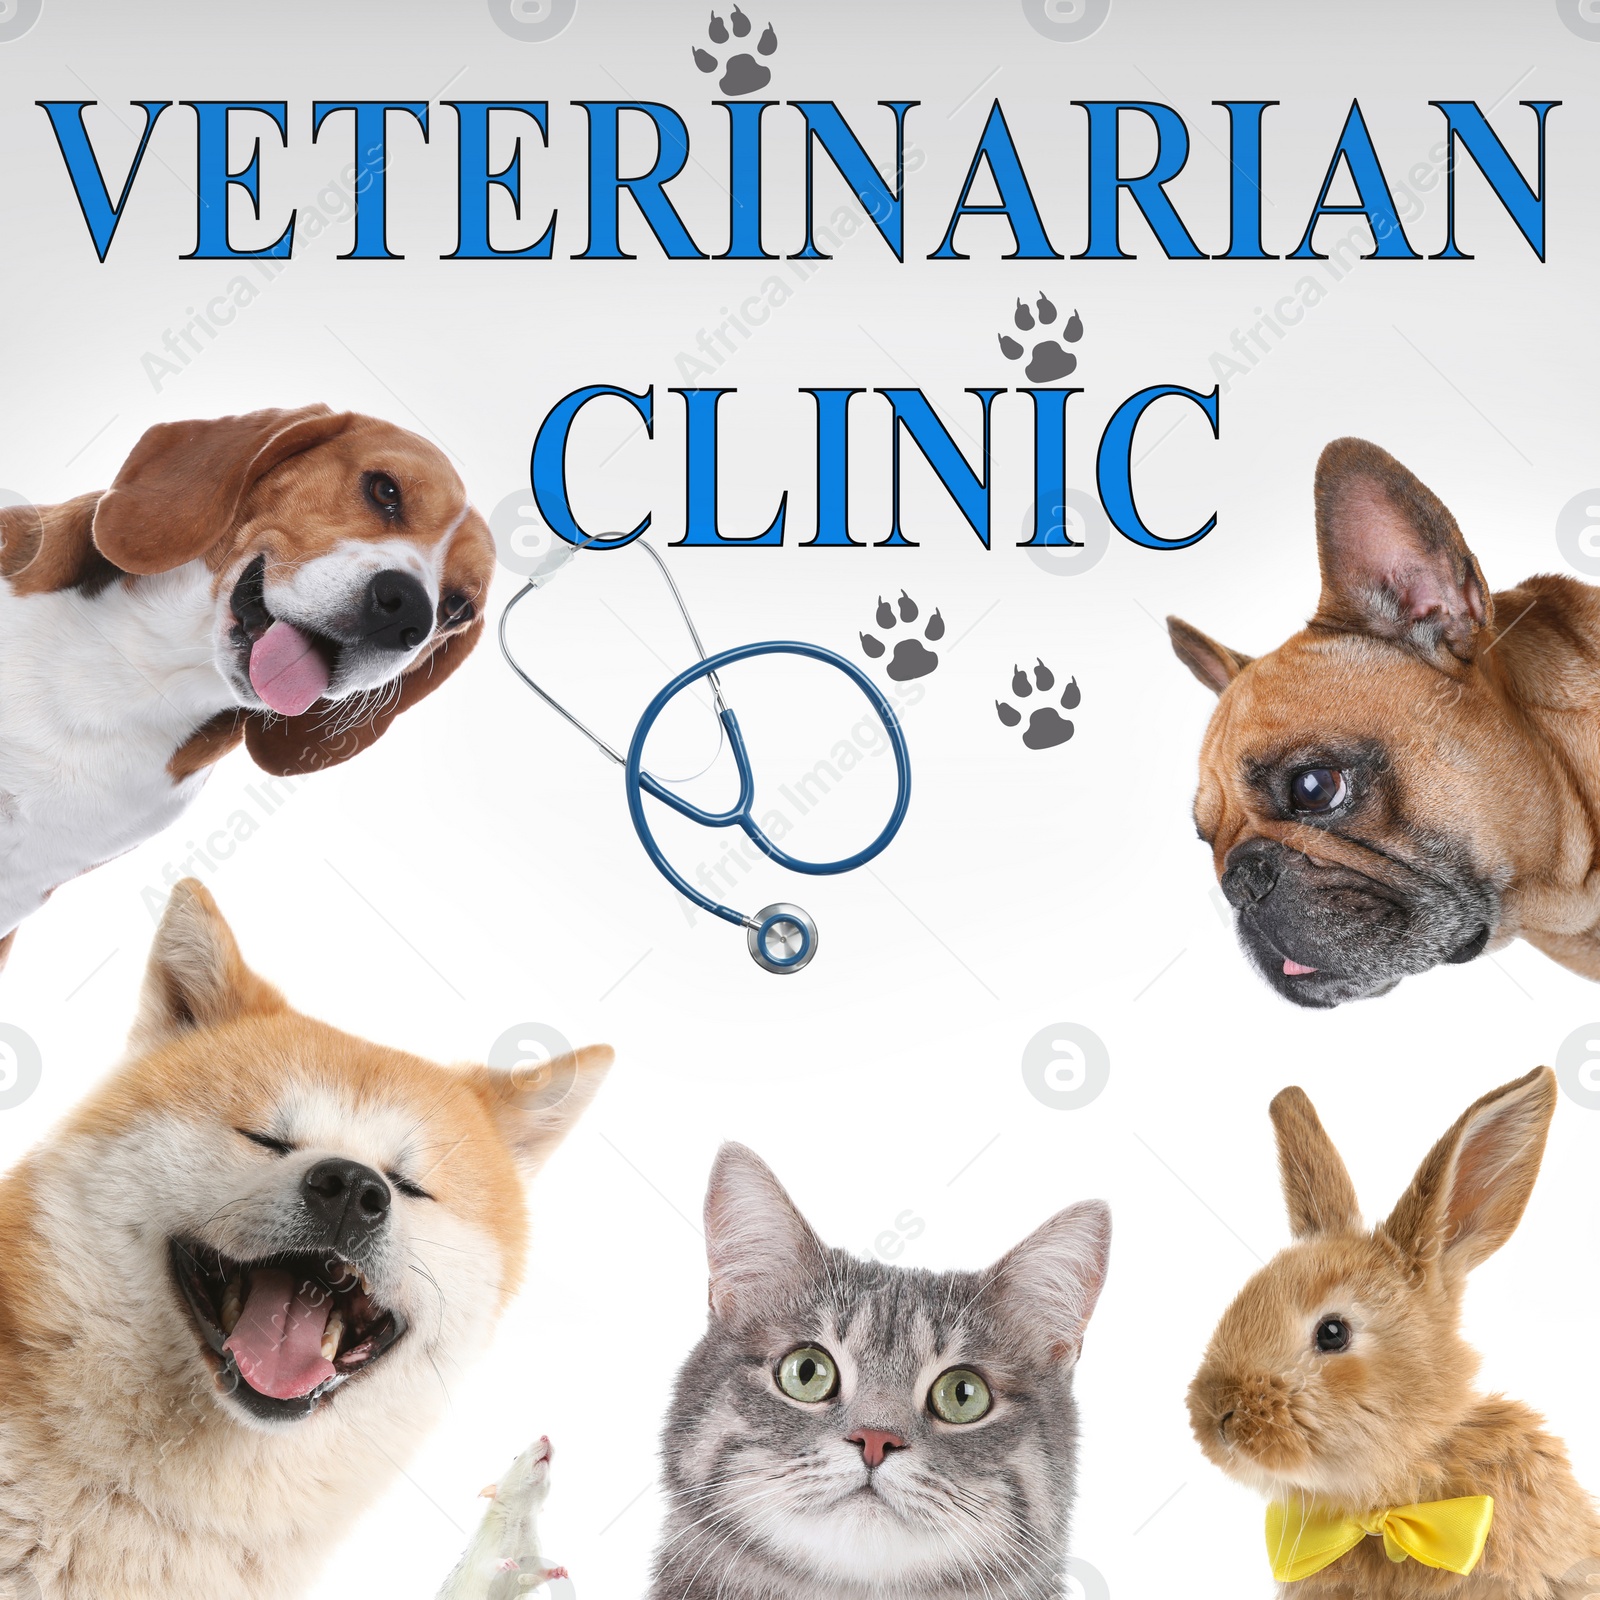 Image of Collage with different cute pets and text VETERINARIAN CLINIC on white background